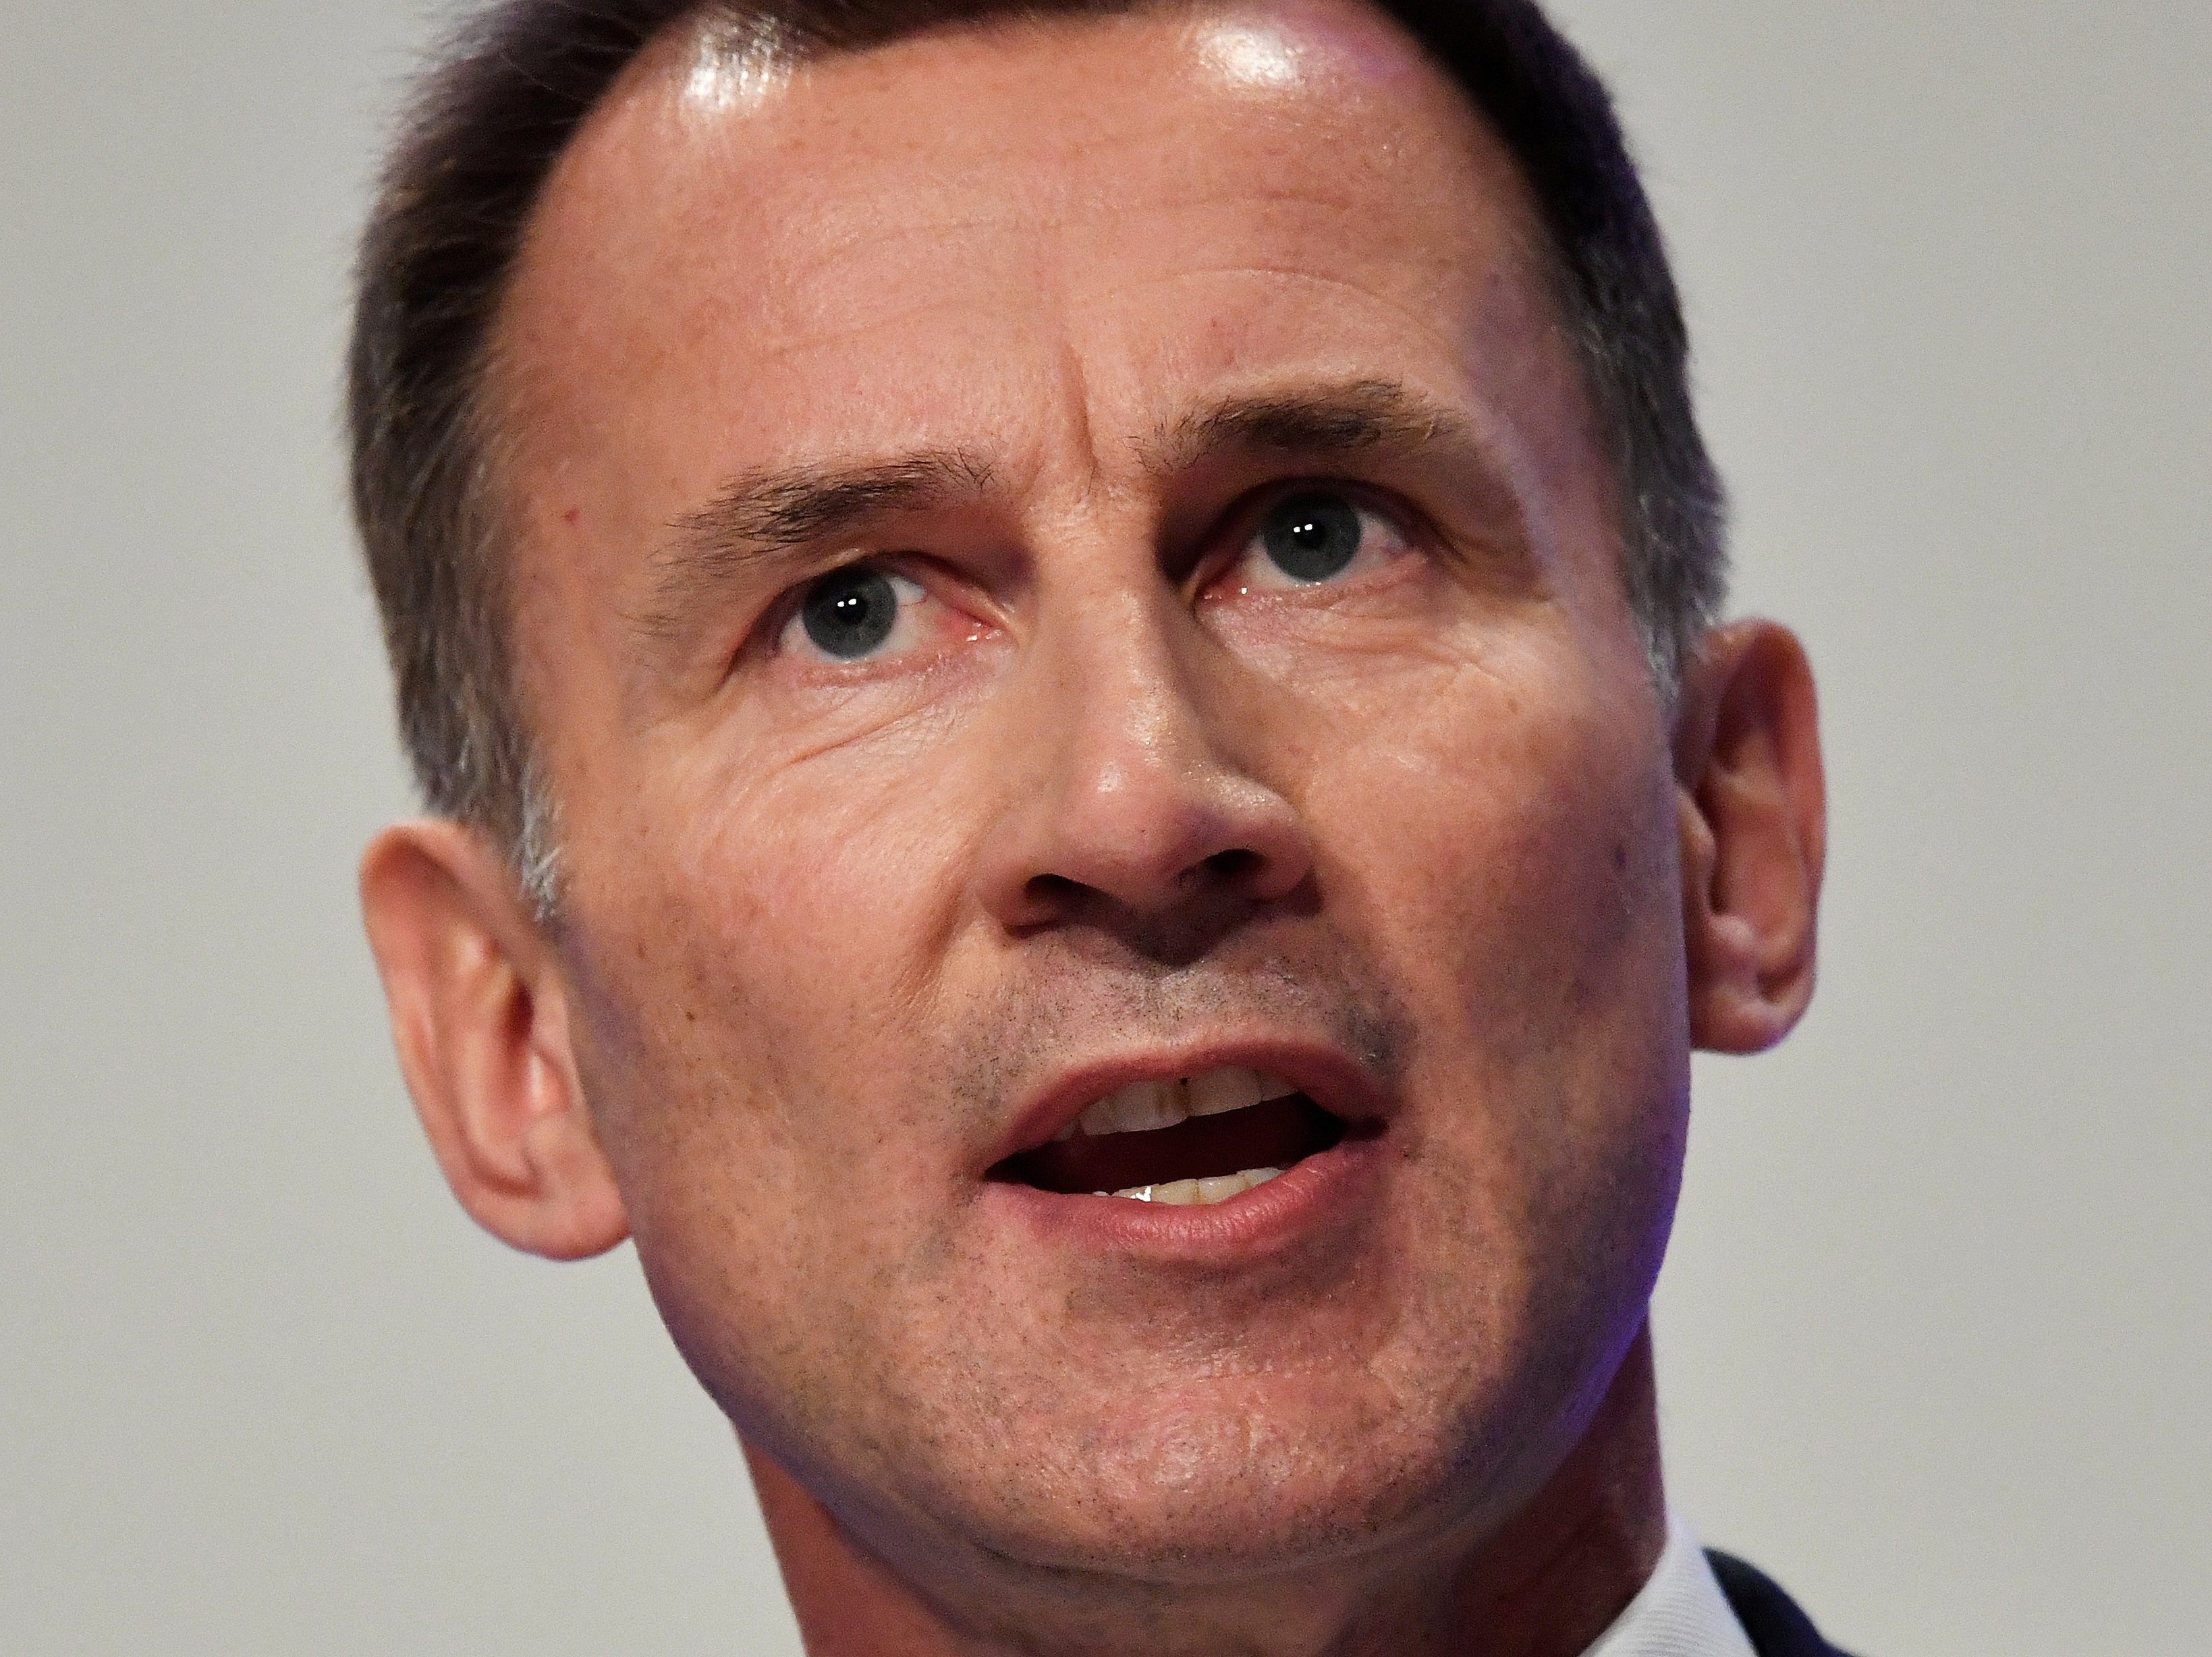 Jeremy Hunt brands BBC an 'absolute joke' over plans to hold Tory leader debate after ballot opens